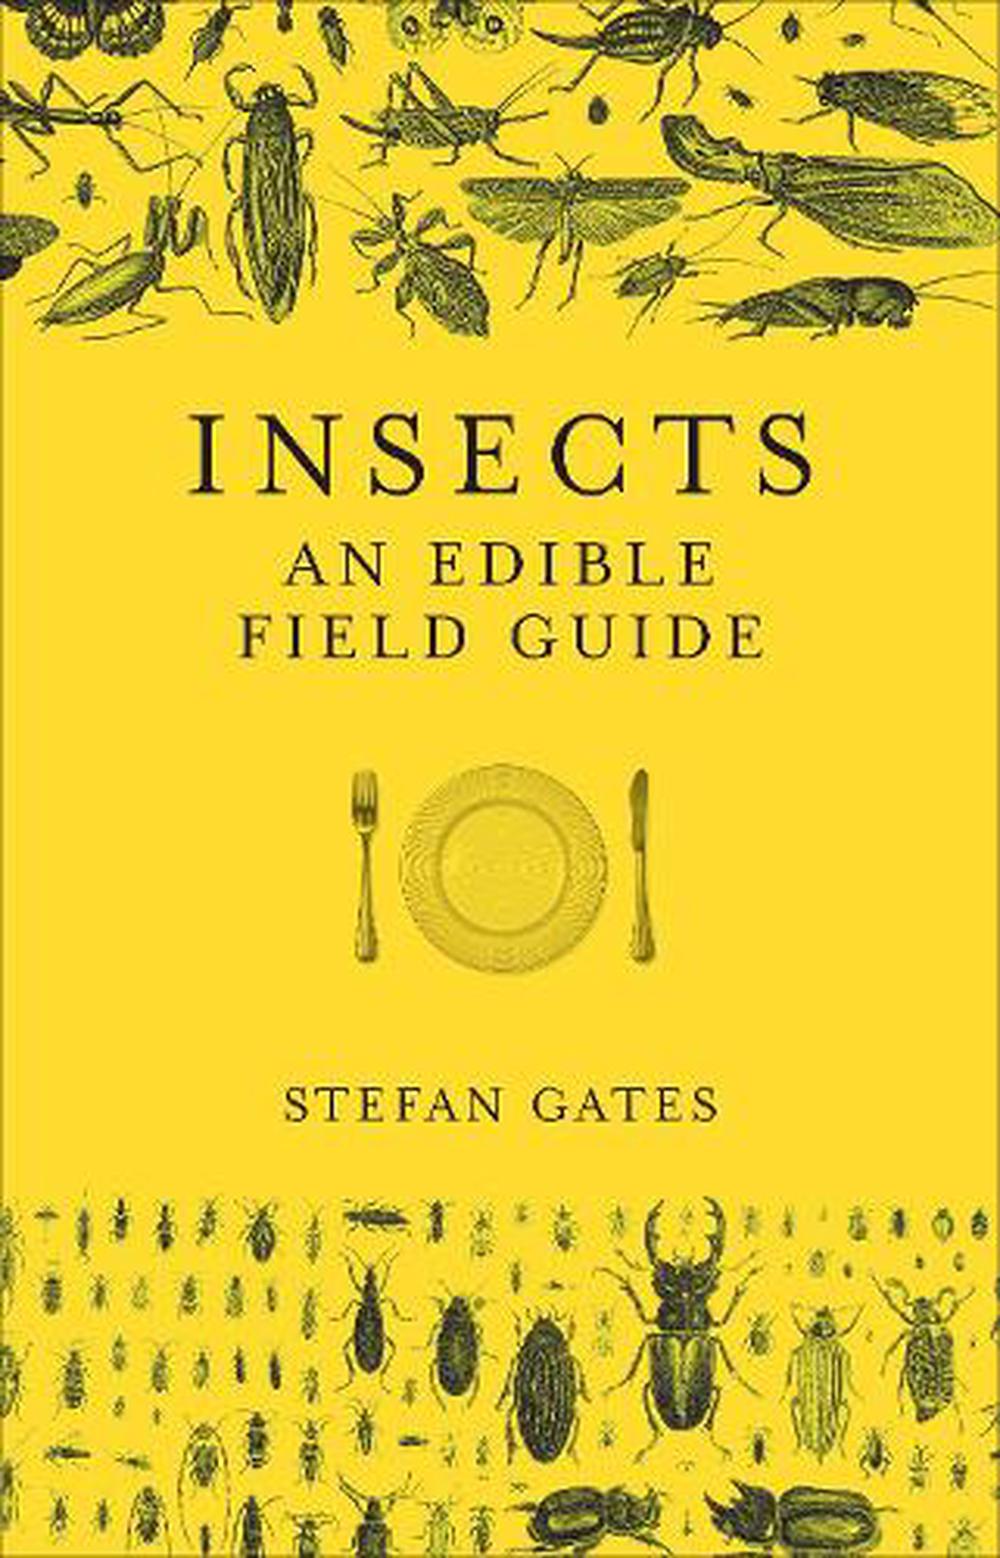 Stefan　The　by　Hardcover,　9781785035258　at　online　Buy　Gates,　Insects　Nile